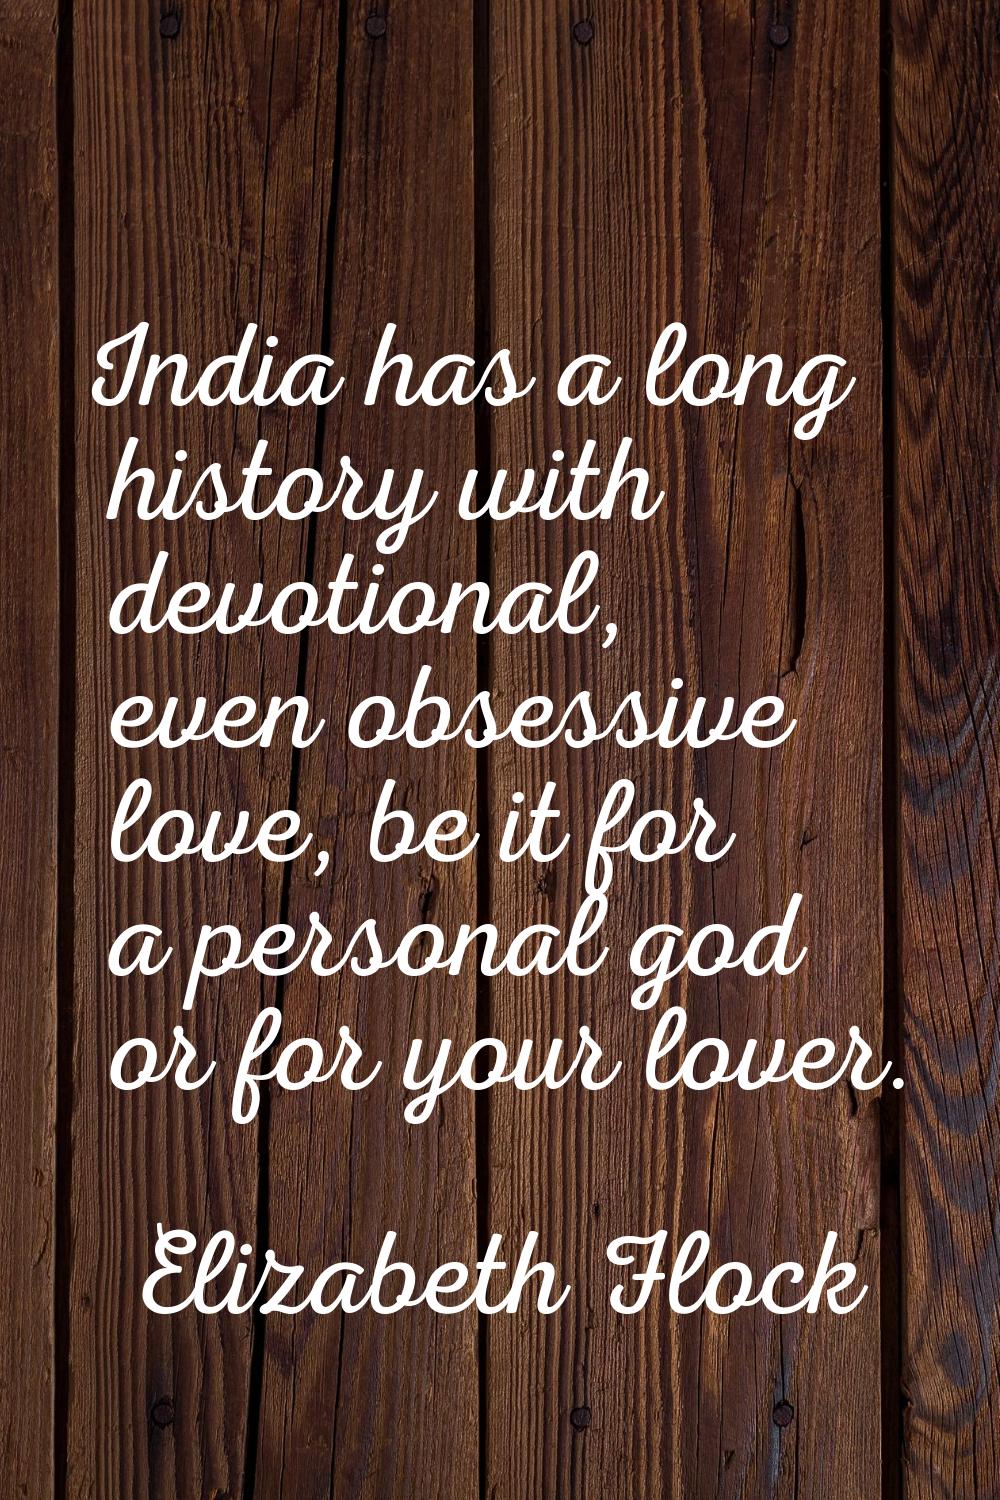 India has a long history with devotional, even obsessive love, be it for a personal god or for your